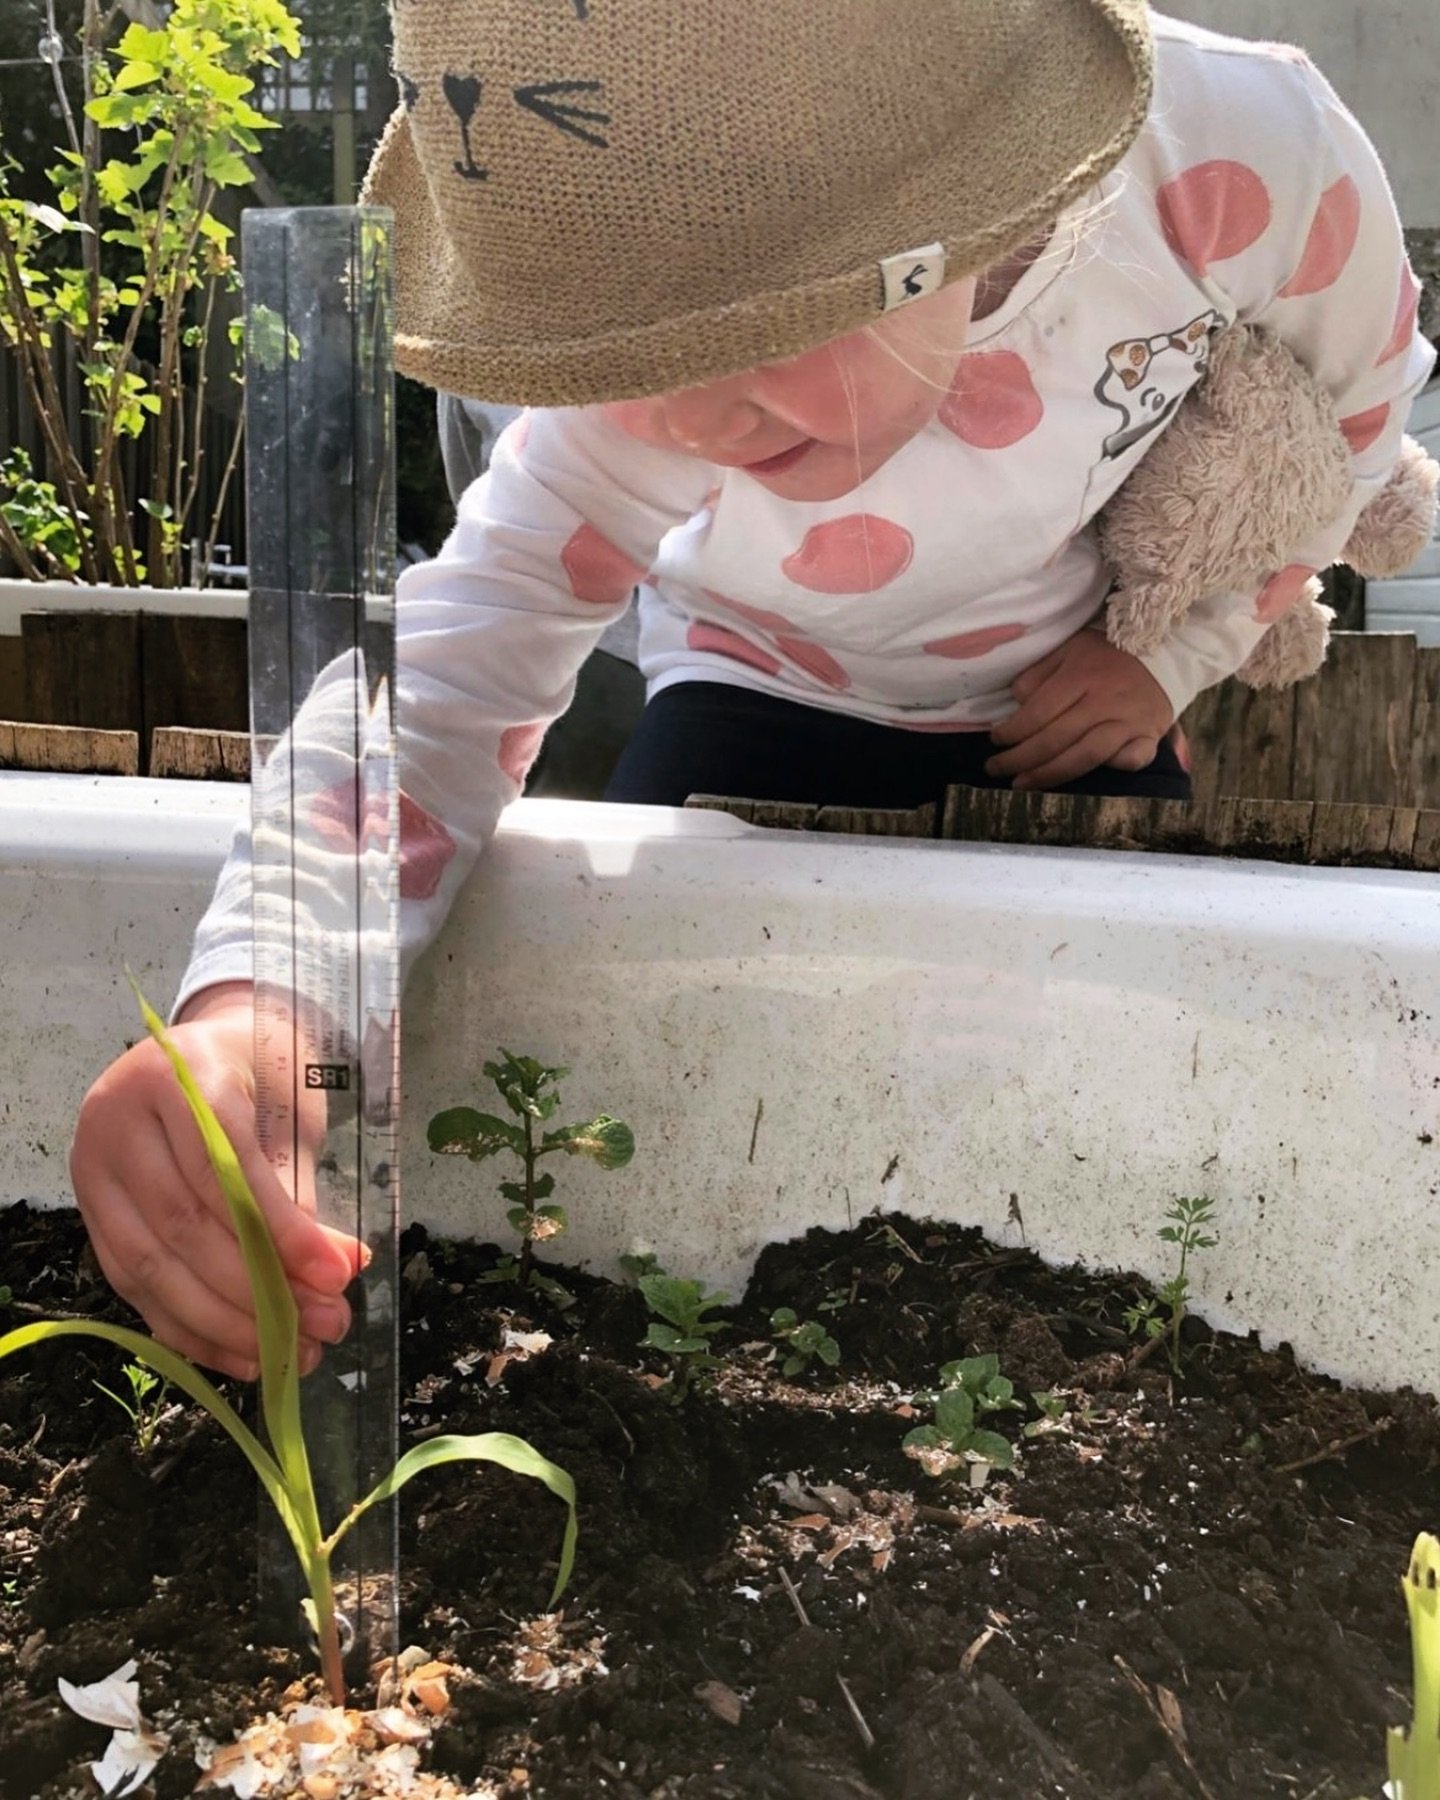 Monitoring growth in the Kitchen Garden at Naturally Learning Falmouth 🌱

The Preschool children are feeling excited as a few shoots have appeared in the vegetable bed! 

#thisisnaturallylearning